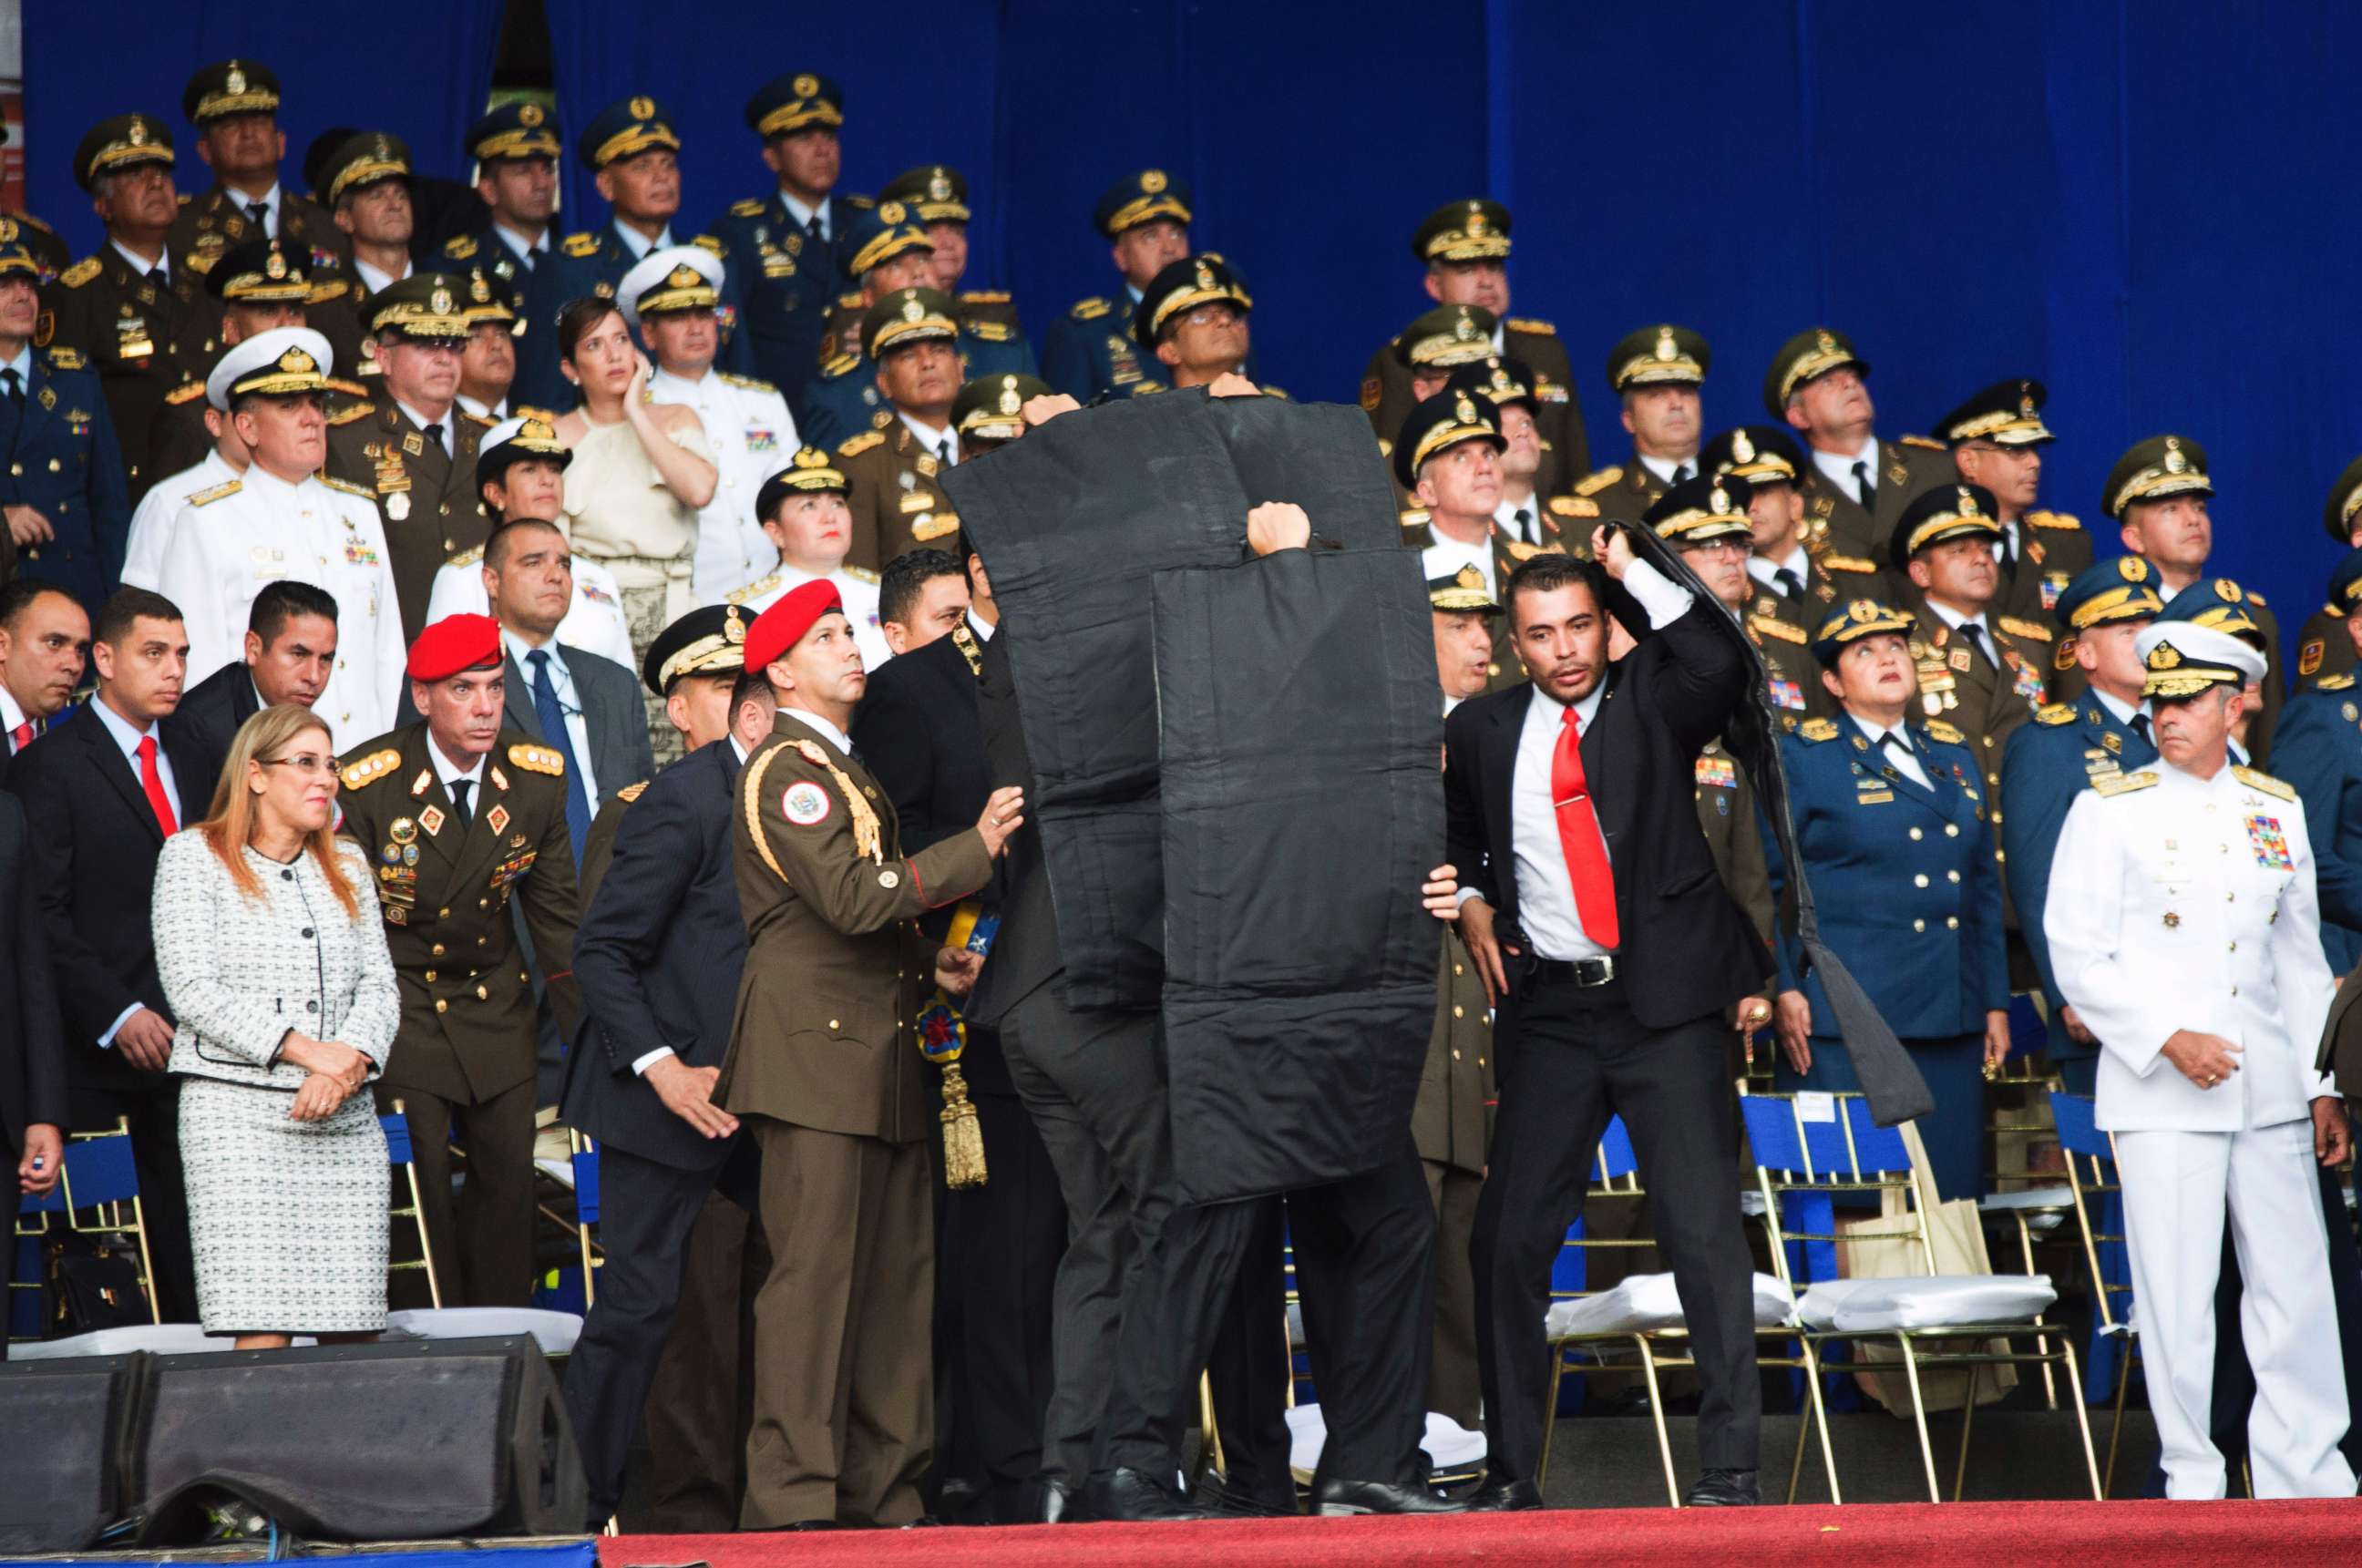 PHOTO: In this photo released by China's Xinhua News Agency, security personnel surround Venezuela's President Nicolas Maduro during an incident as he was giving a speech in Caracas, Venezuela, Aug. 4, 2018.